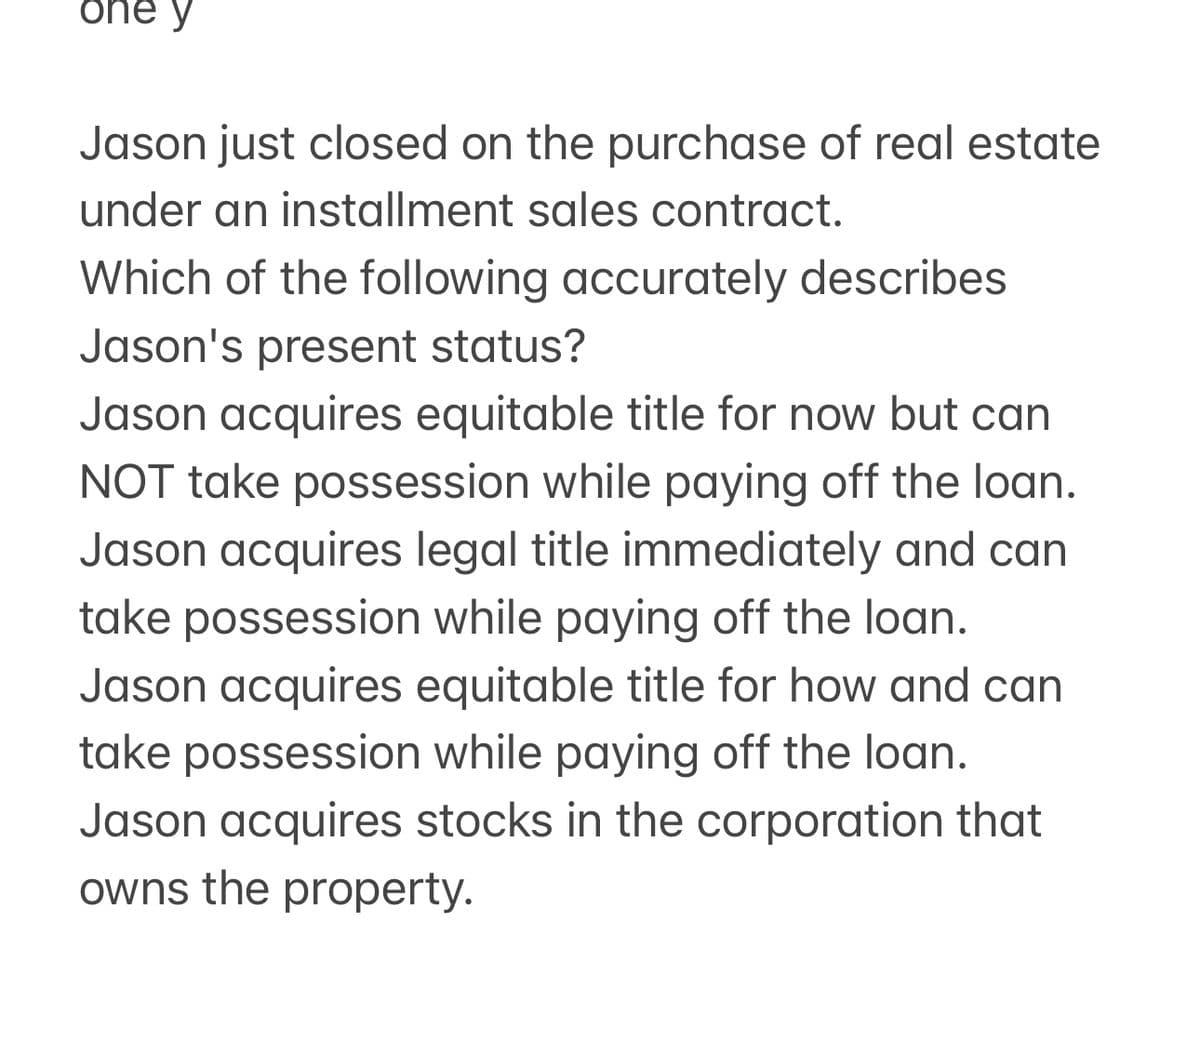 one y
Jason just closed on the purchase of real estate
under an installment sales contract.
Which of the following accurately describes
Jason's present status?
Jason acquires equitable title for now but can
NOT take possession while paying off the loan.
Jason acquires legal title immediately and can
take possession while paying off the loan.
Jason acquires equitable title for how and can
take possession while paying off the loan.
Jason acquires stocks in the corporation that
owns the property.